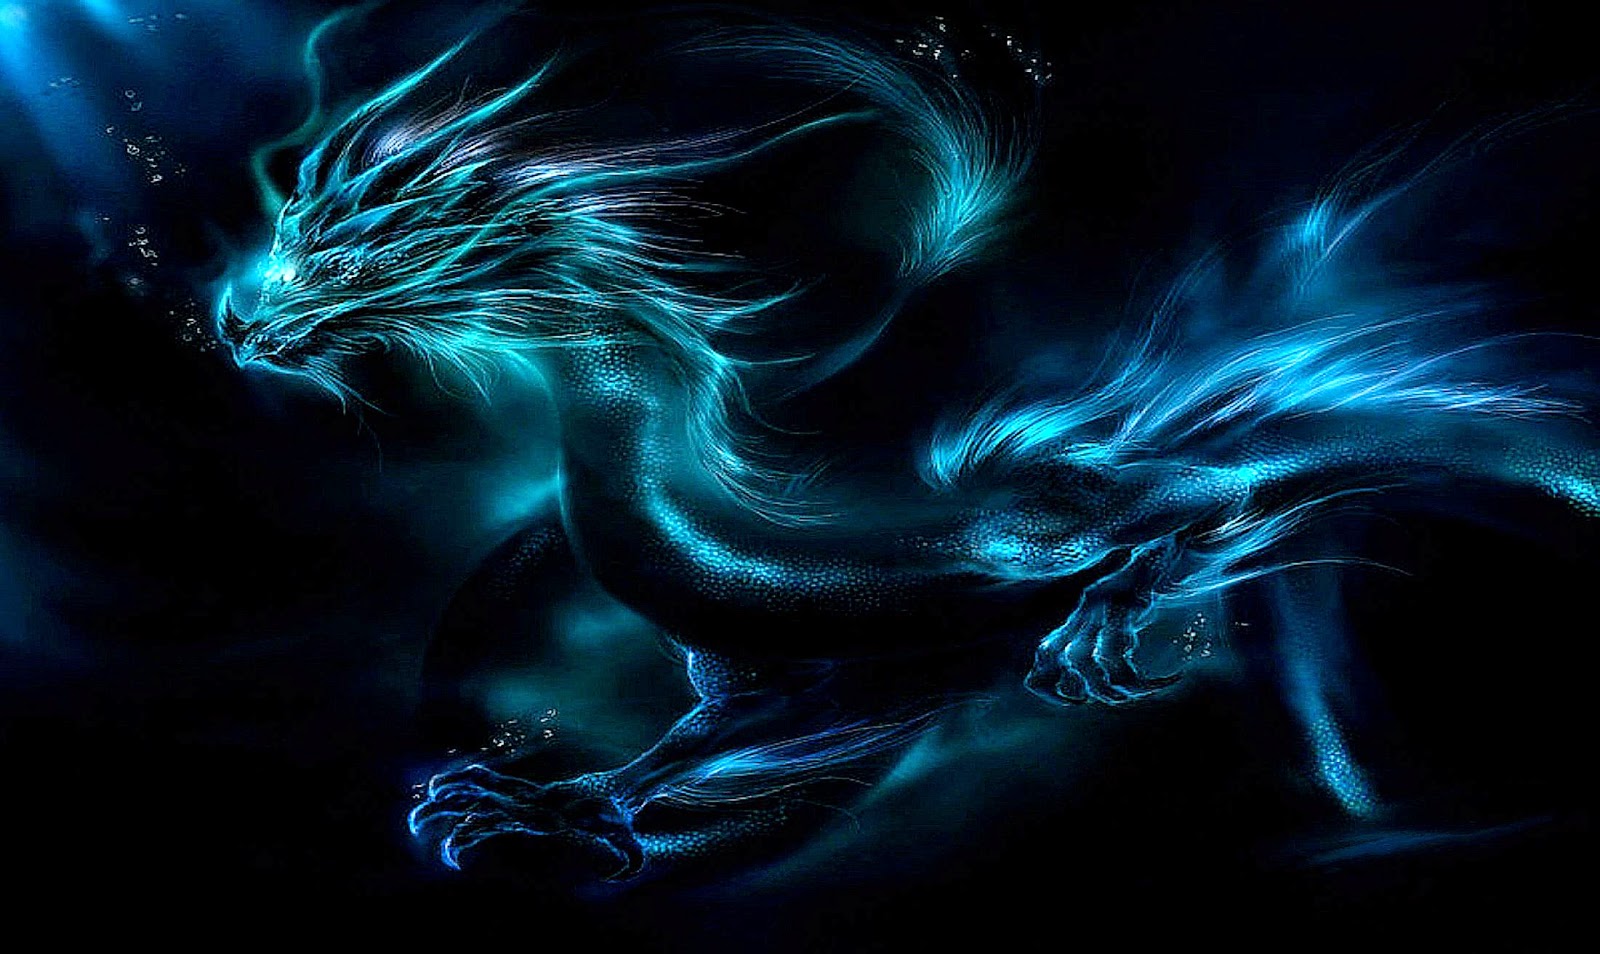 Free Dragons Wallpapers Dragons Images for Desktop 39